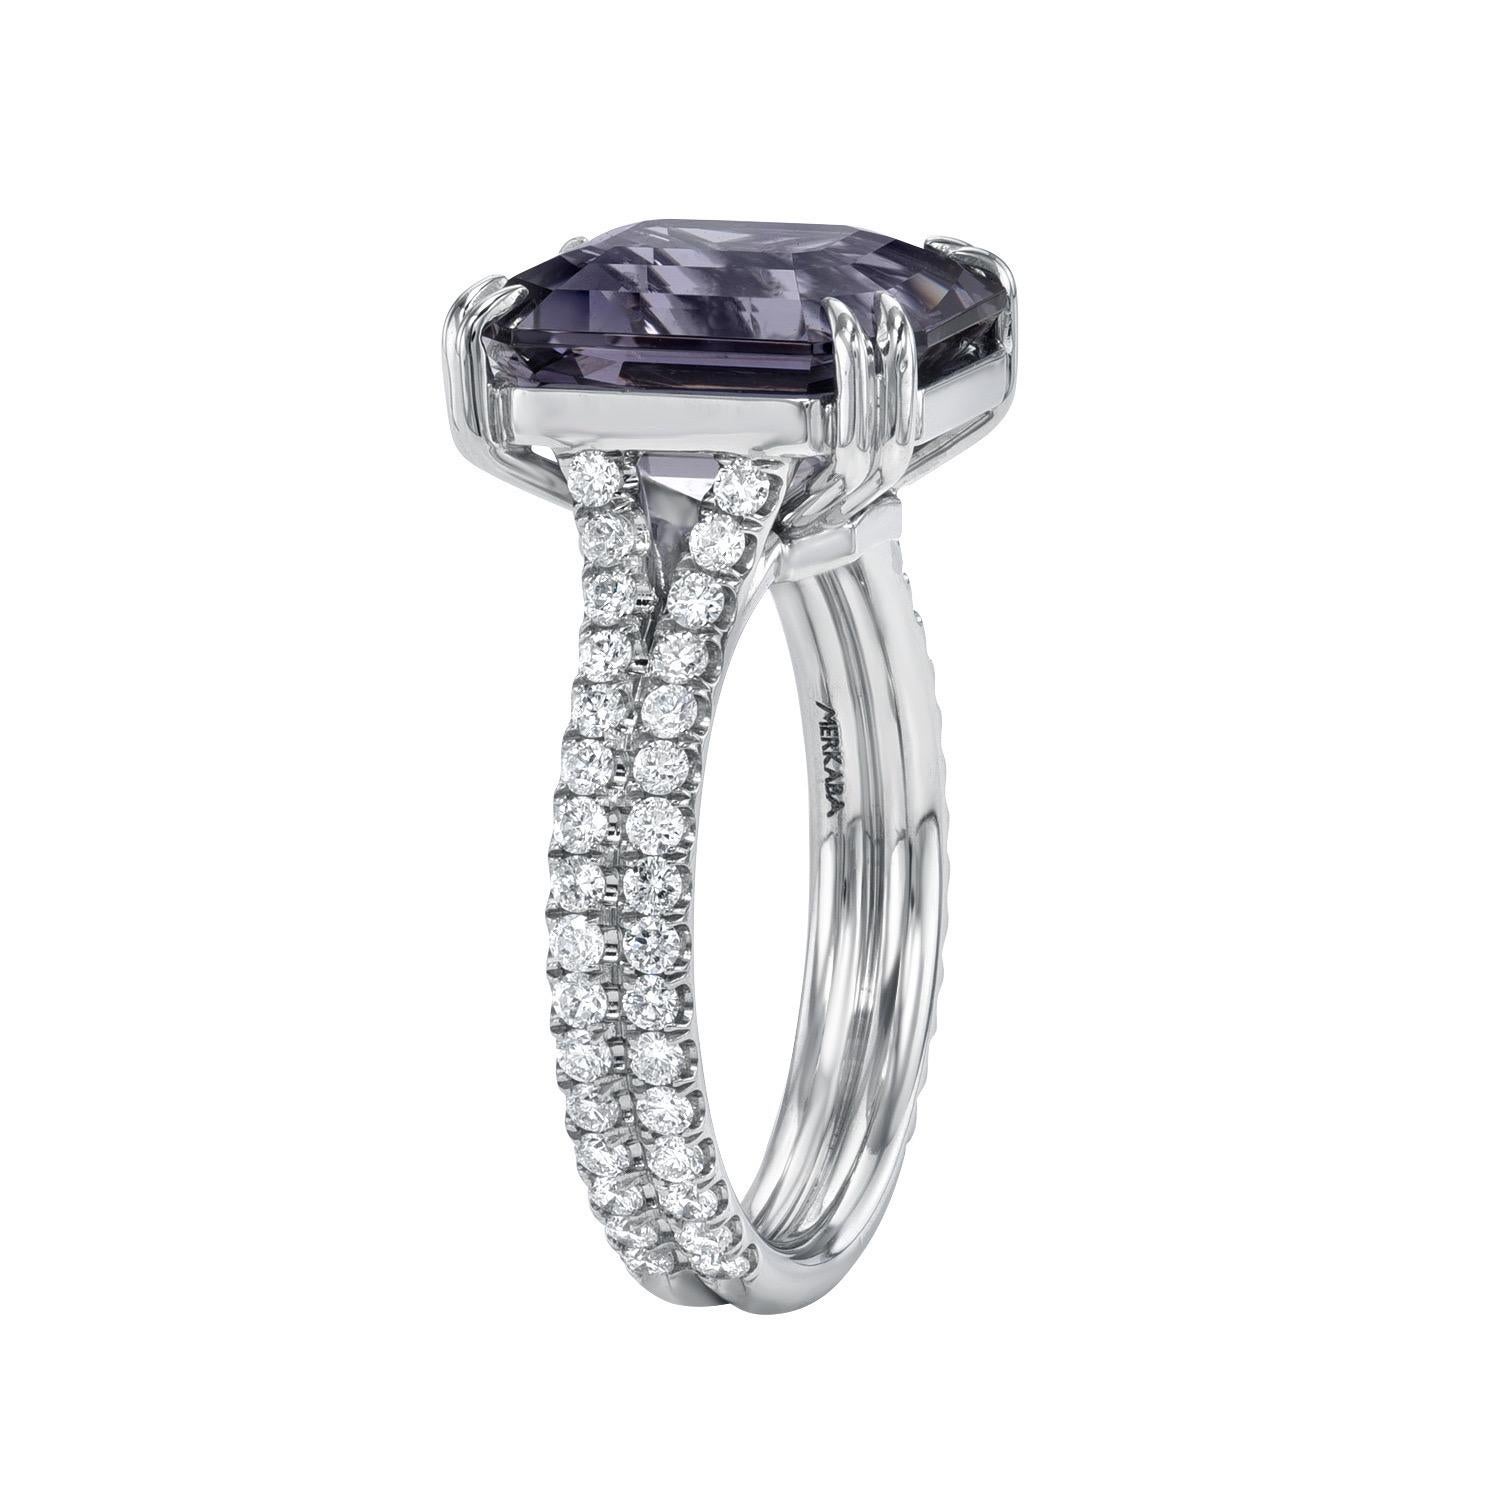 Exceptional 6.18 carat, flawless Grey-Purple Spinel emerald-cut platinum ring, decorated with a total of 0.64 carat round brilliant collection diamonds.
Ring size 6. Resizing is complementary upon request.
Crafted by extremely skilled hands in the